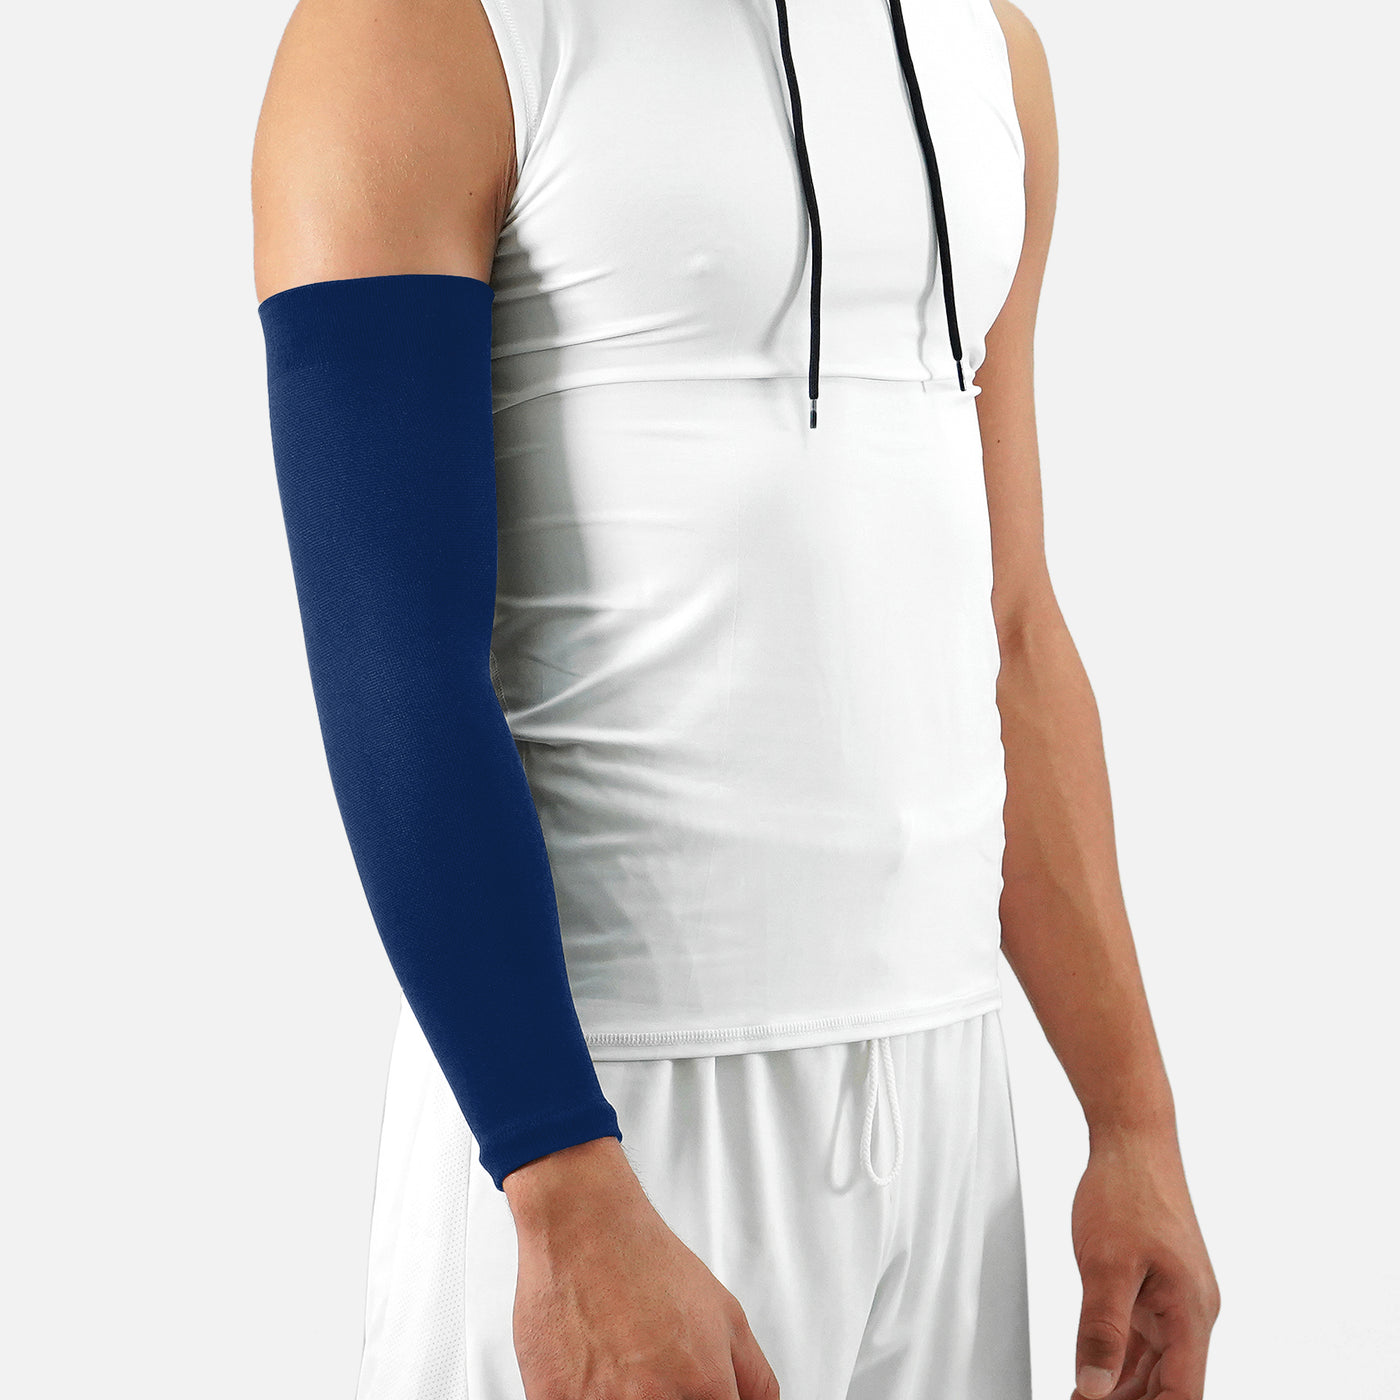 Hue Navy Blue One Size Fits All Football Arm Sleeve